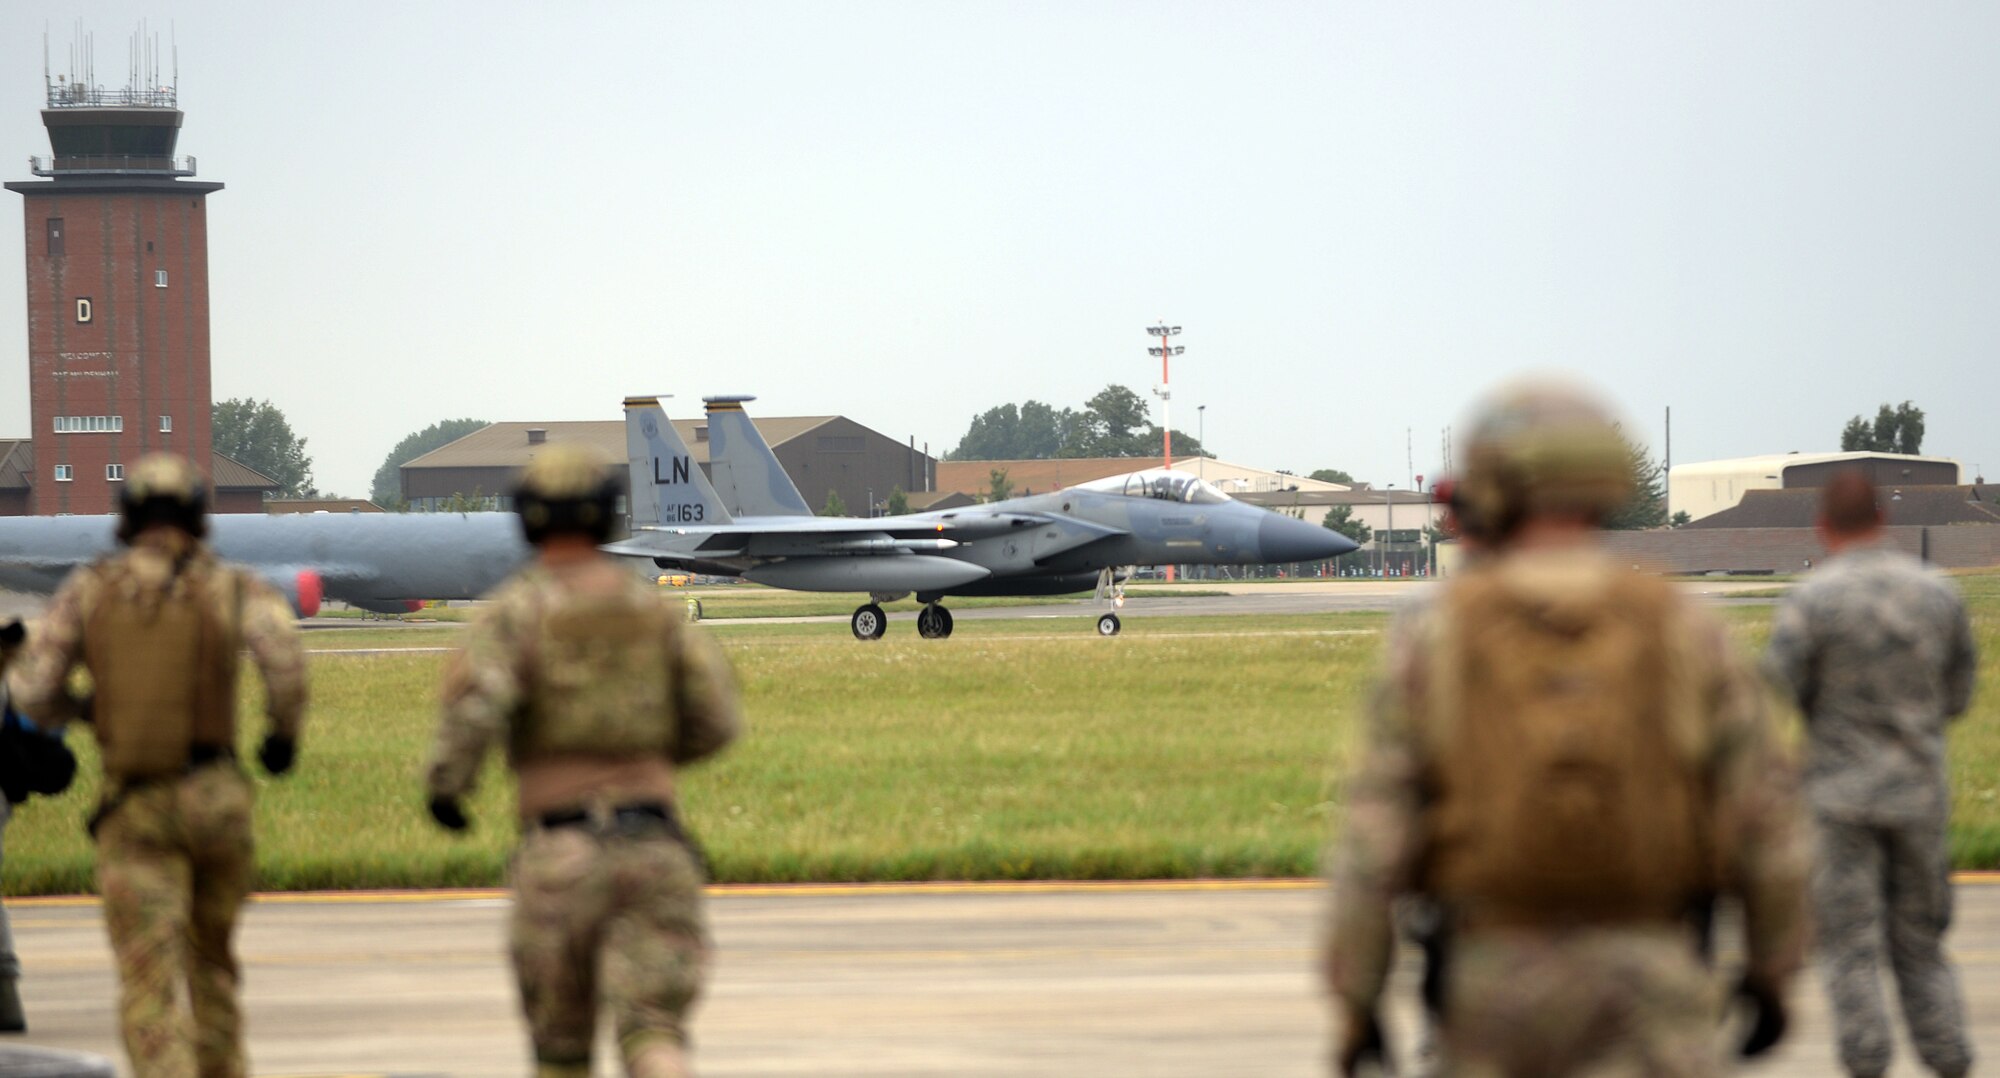 A U.S. Air Force F-15C Eagle lands on RAF Mildenhall, England, before being refueled by an MC-130J Commando II July 26, 2017. Exercise Rapid Eagle is the first time a Forward Arming and Refueling Point exercise was conducted with an MC-130 and an F-15C. (U.S. Air Force photo by Airman 1st Class Luke Milano)